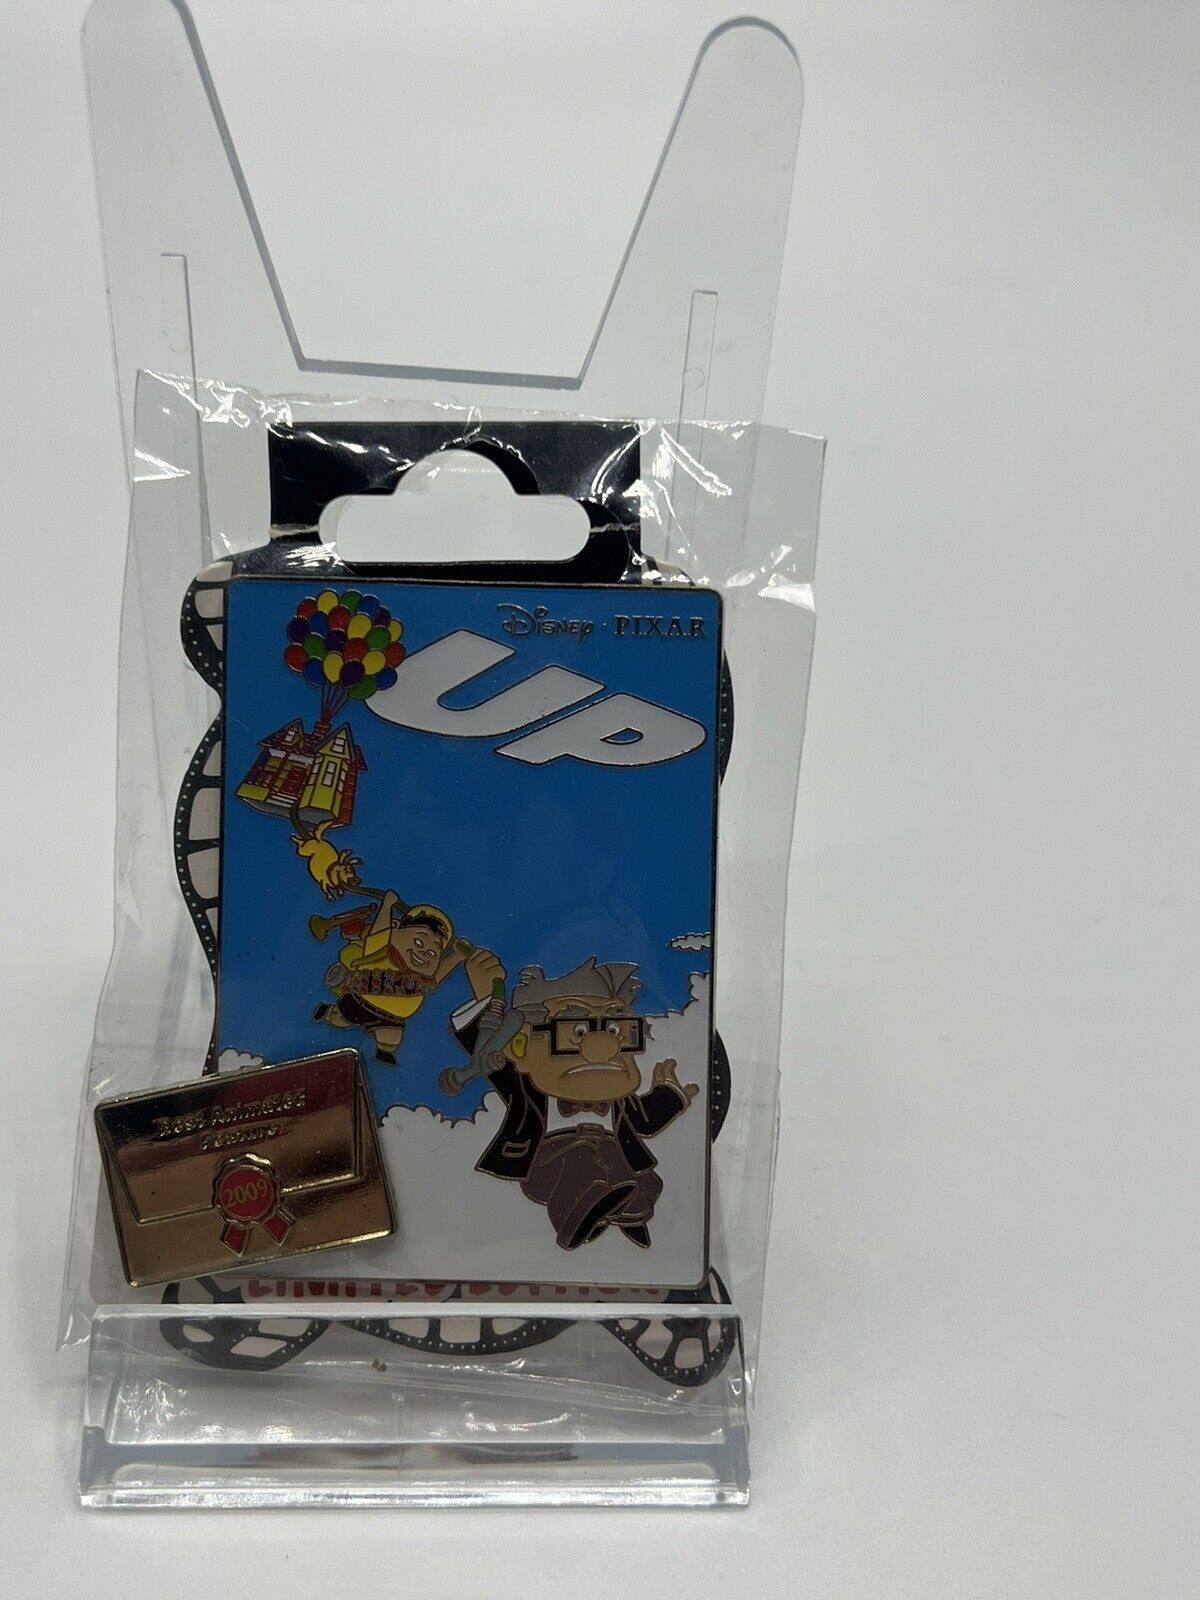 Disney Up Best Animated Feature 2009 LE 400 Pin DSF DSSH Carl Russell Pixar  | eBay